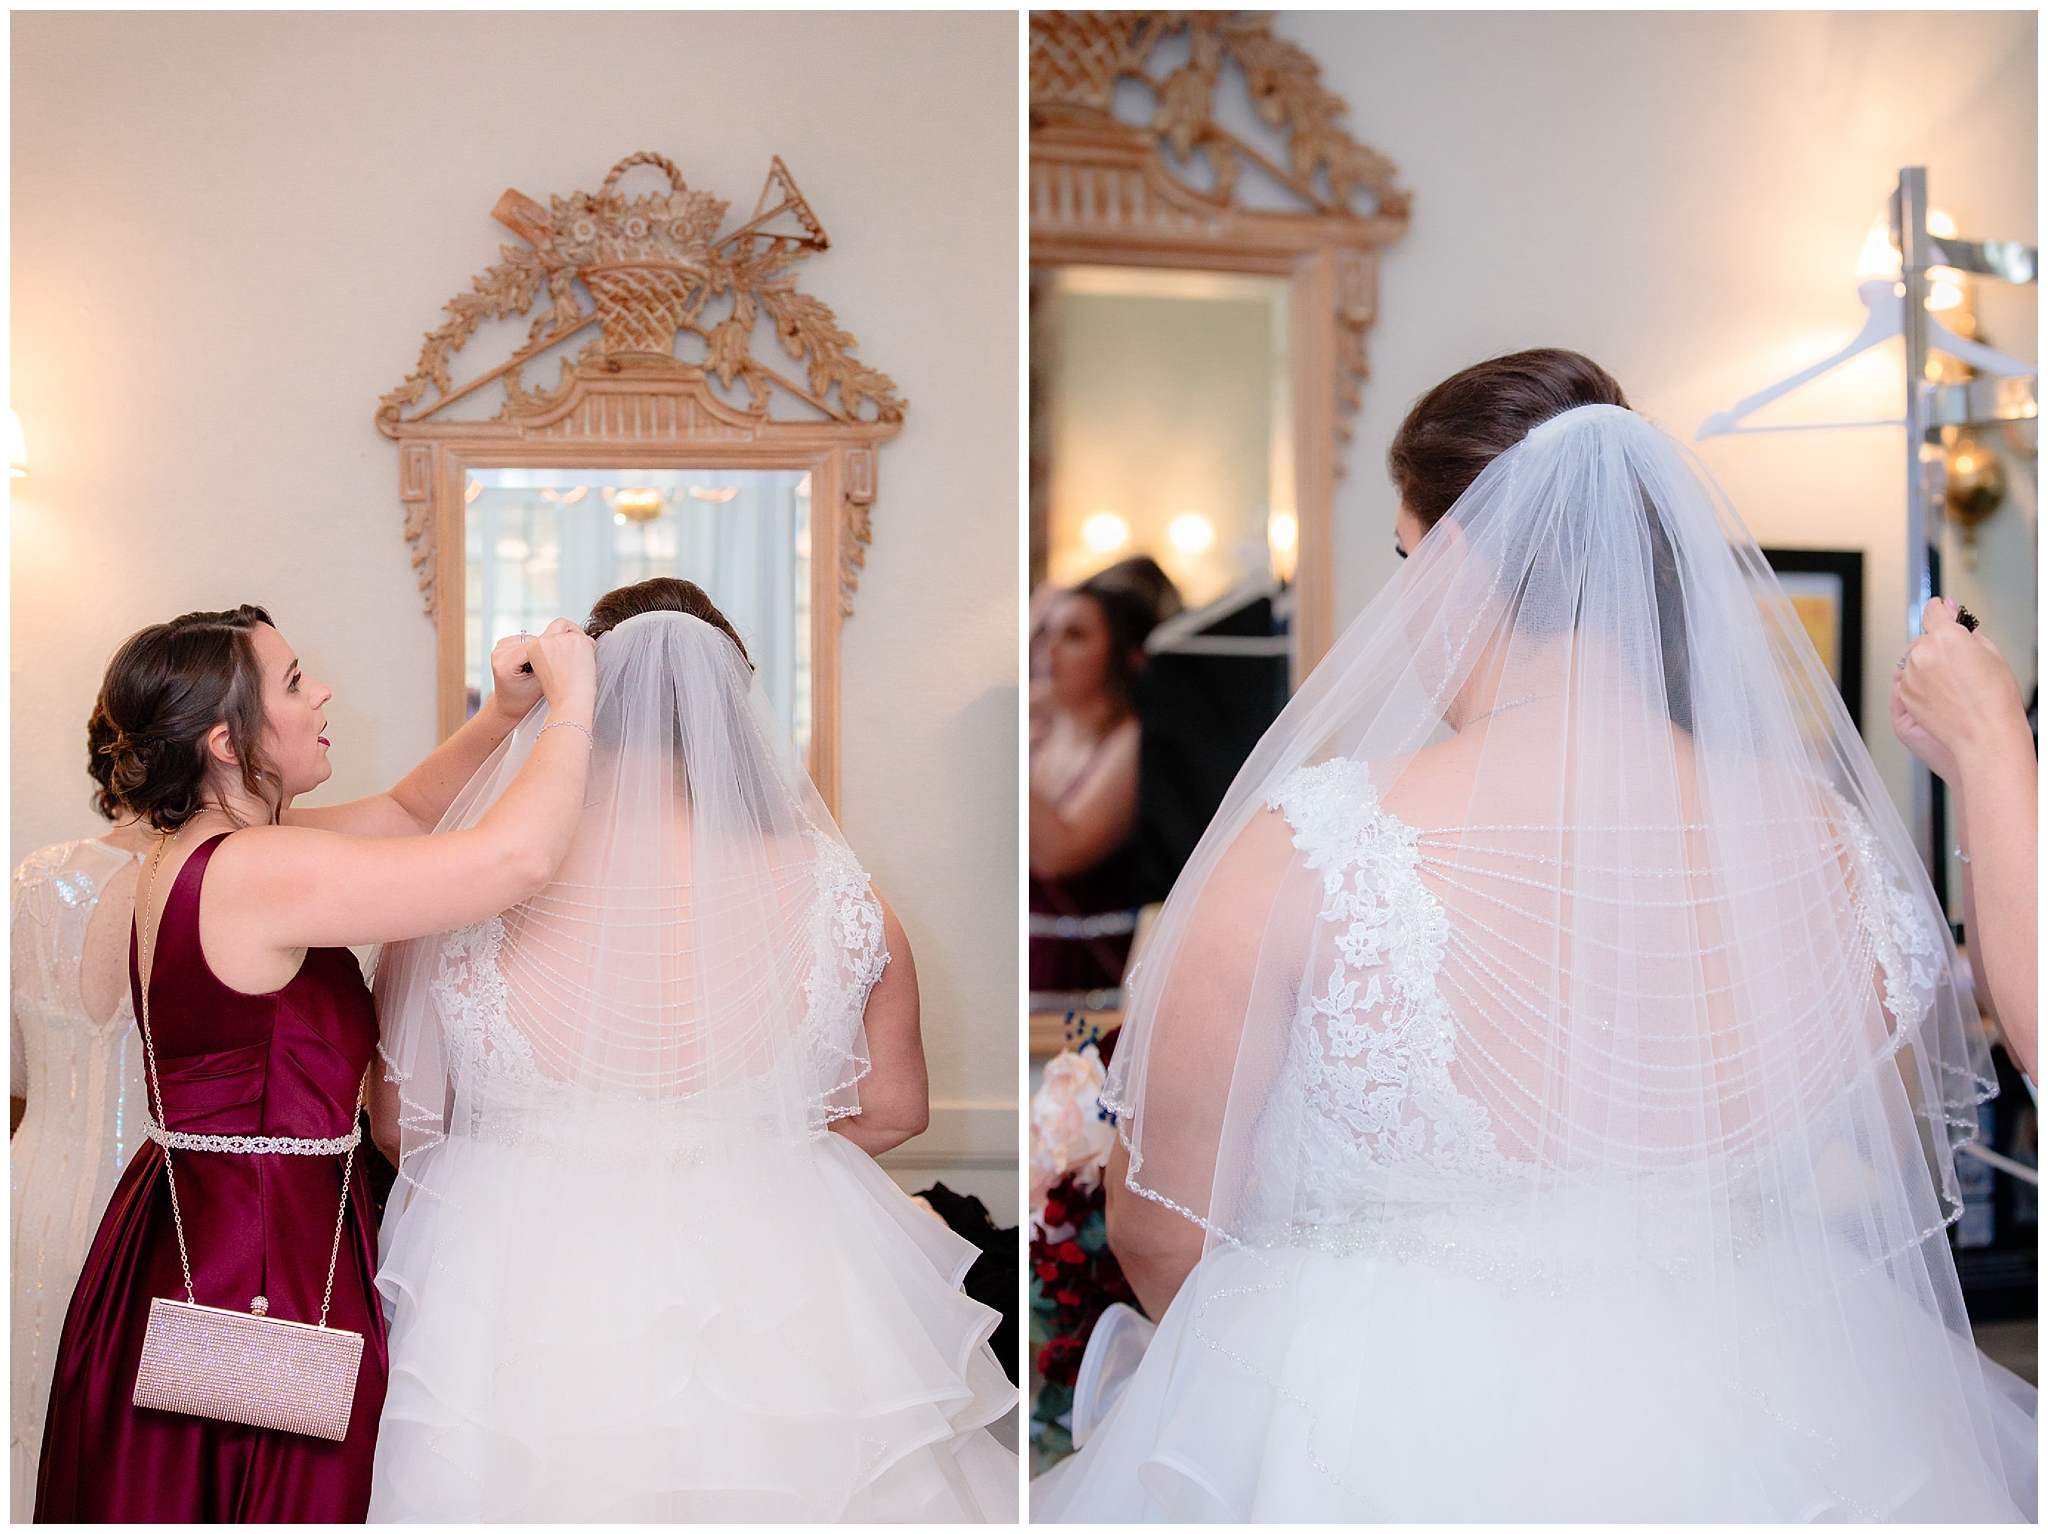 Bride getting her veil pinned into her hair before the wedding at Mt. Lebanon United Methodist Church